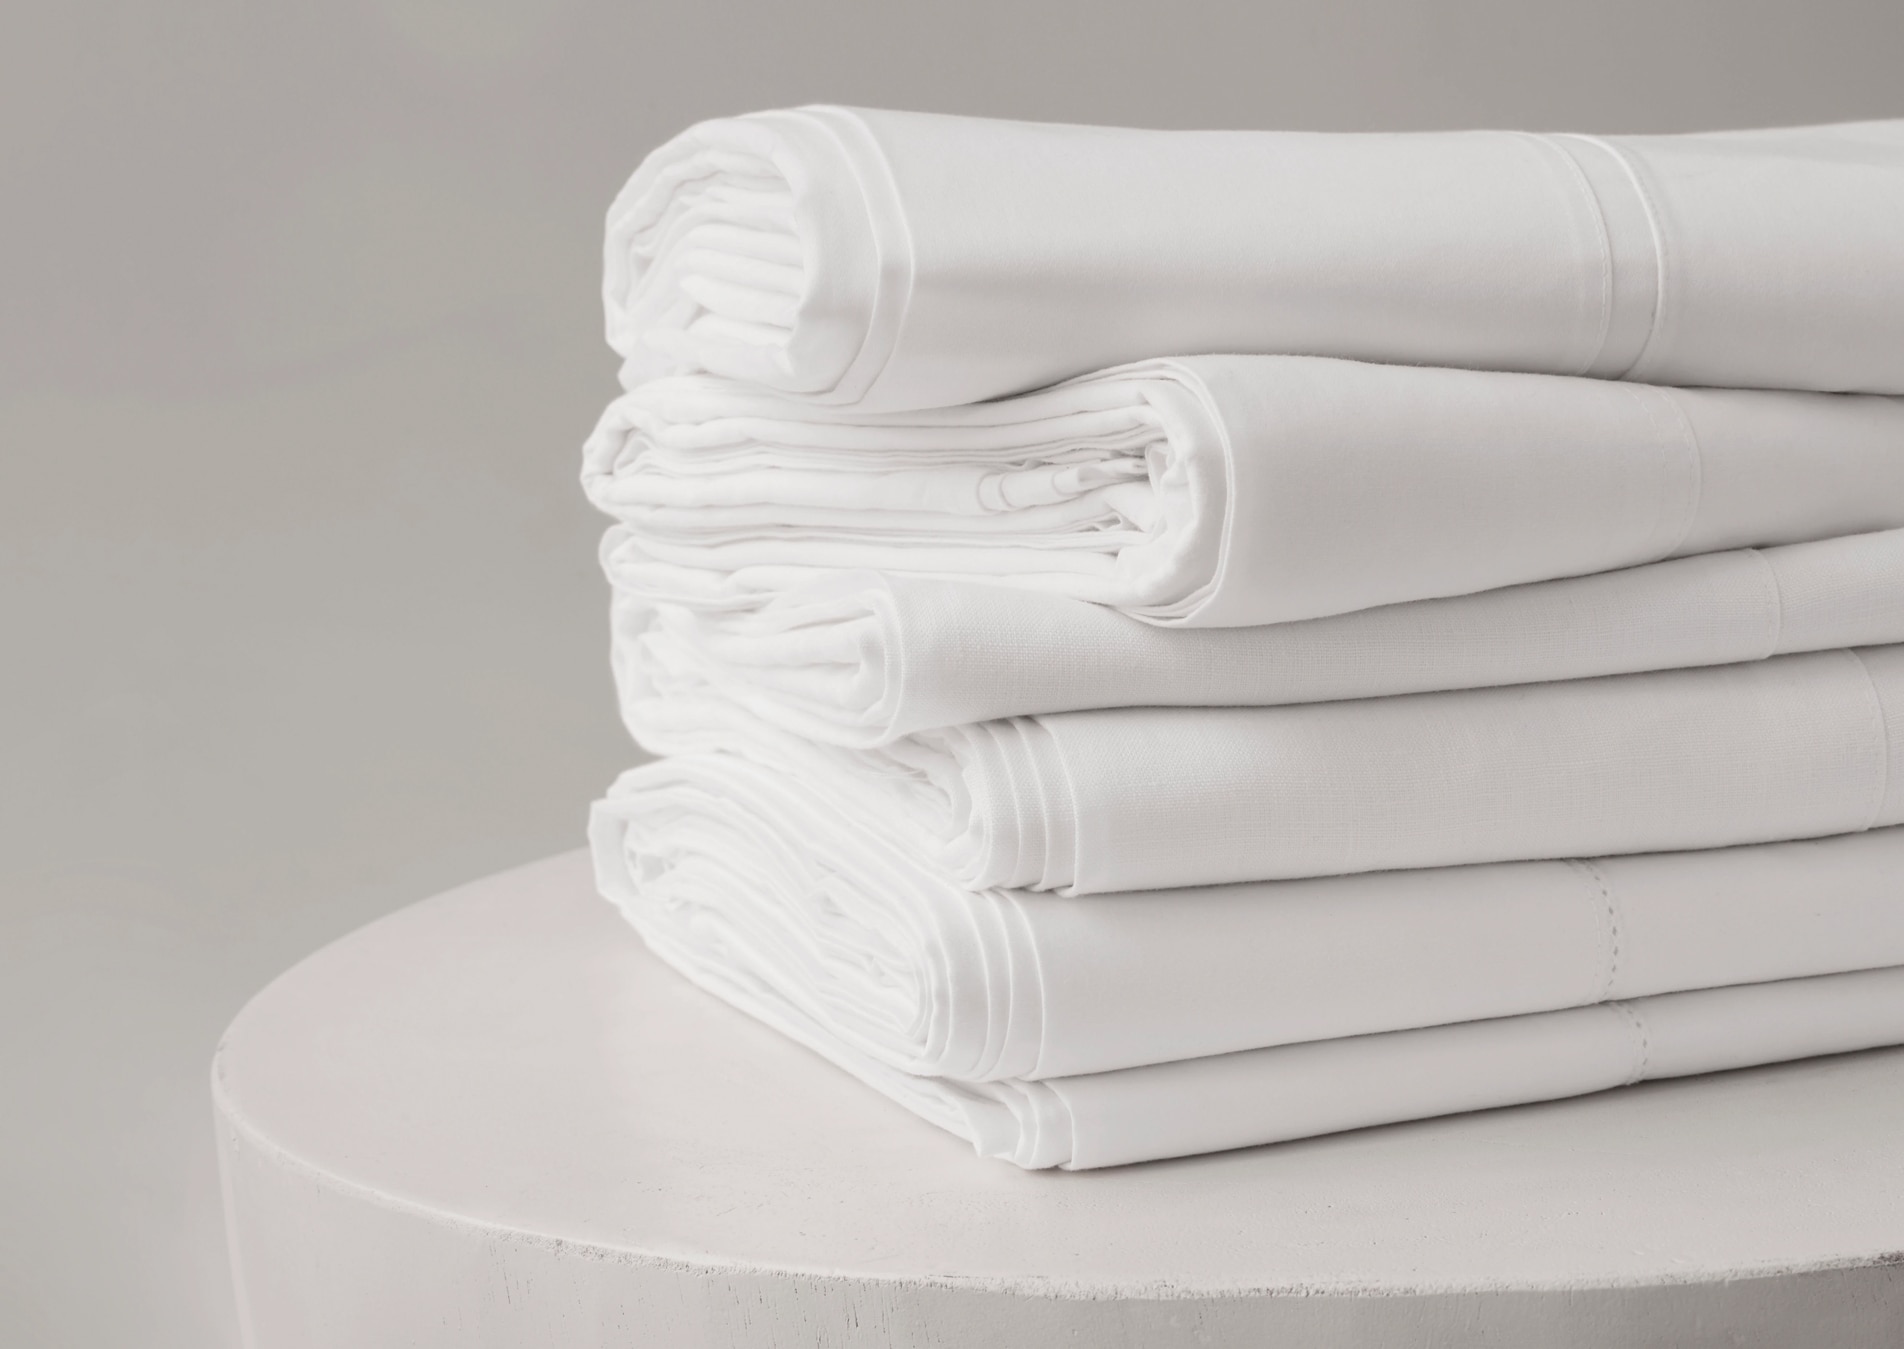 A pile of white sheets, folded and stacked on top of a white table